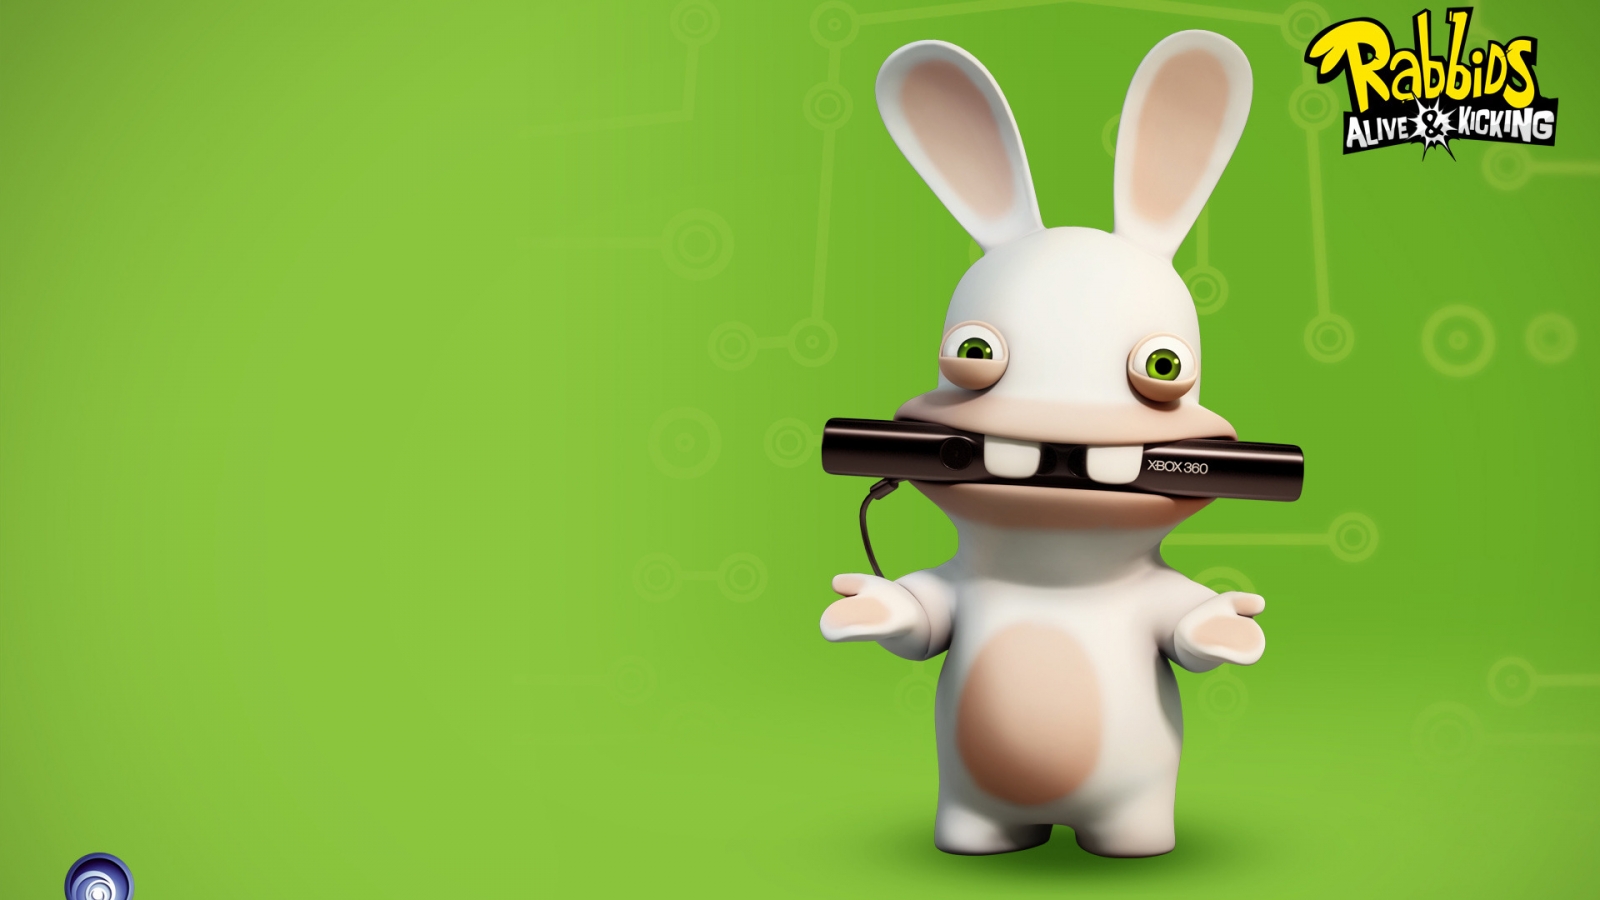 Rabbids Alive and Kicking Game for 1600 x 900 HDTV resolution